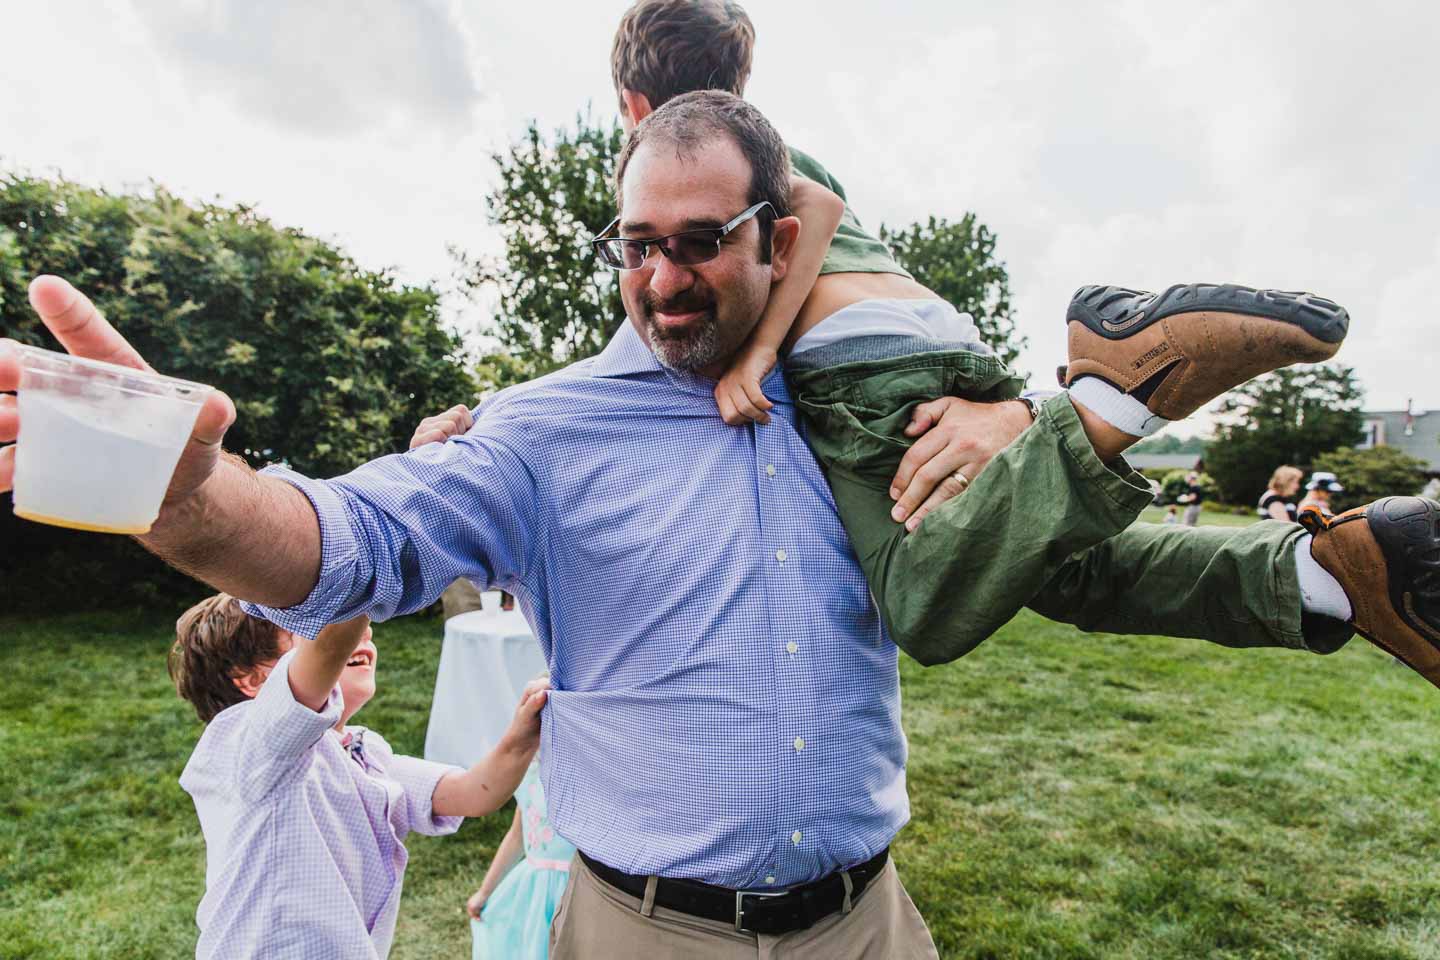 man holds kid over his shoulder while another one pulls on his shirt, sunglasses disheveled and holding a drink out of the picture